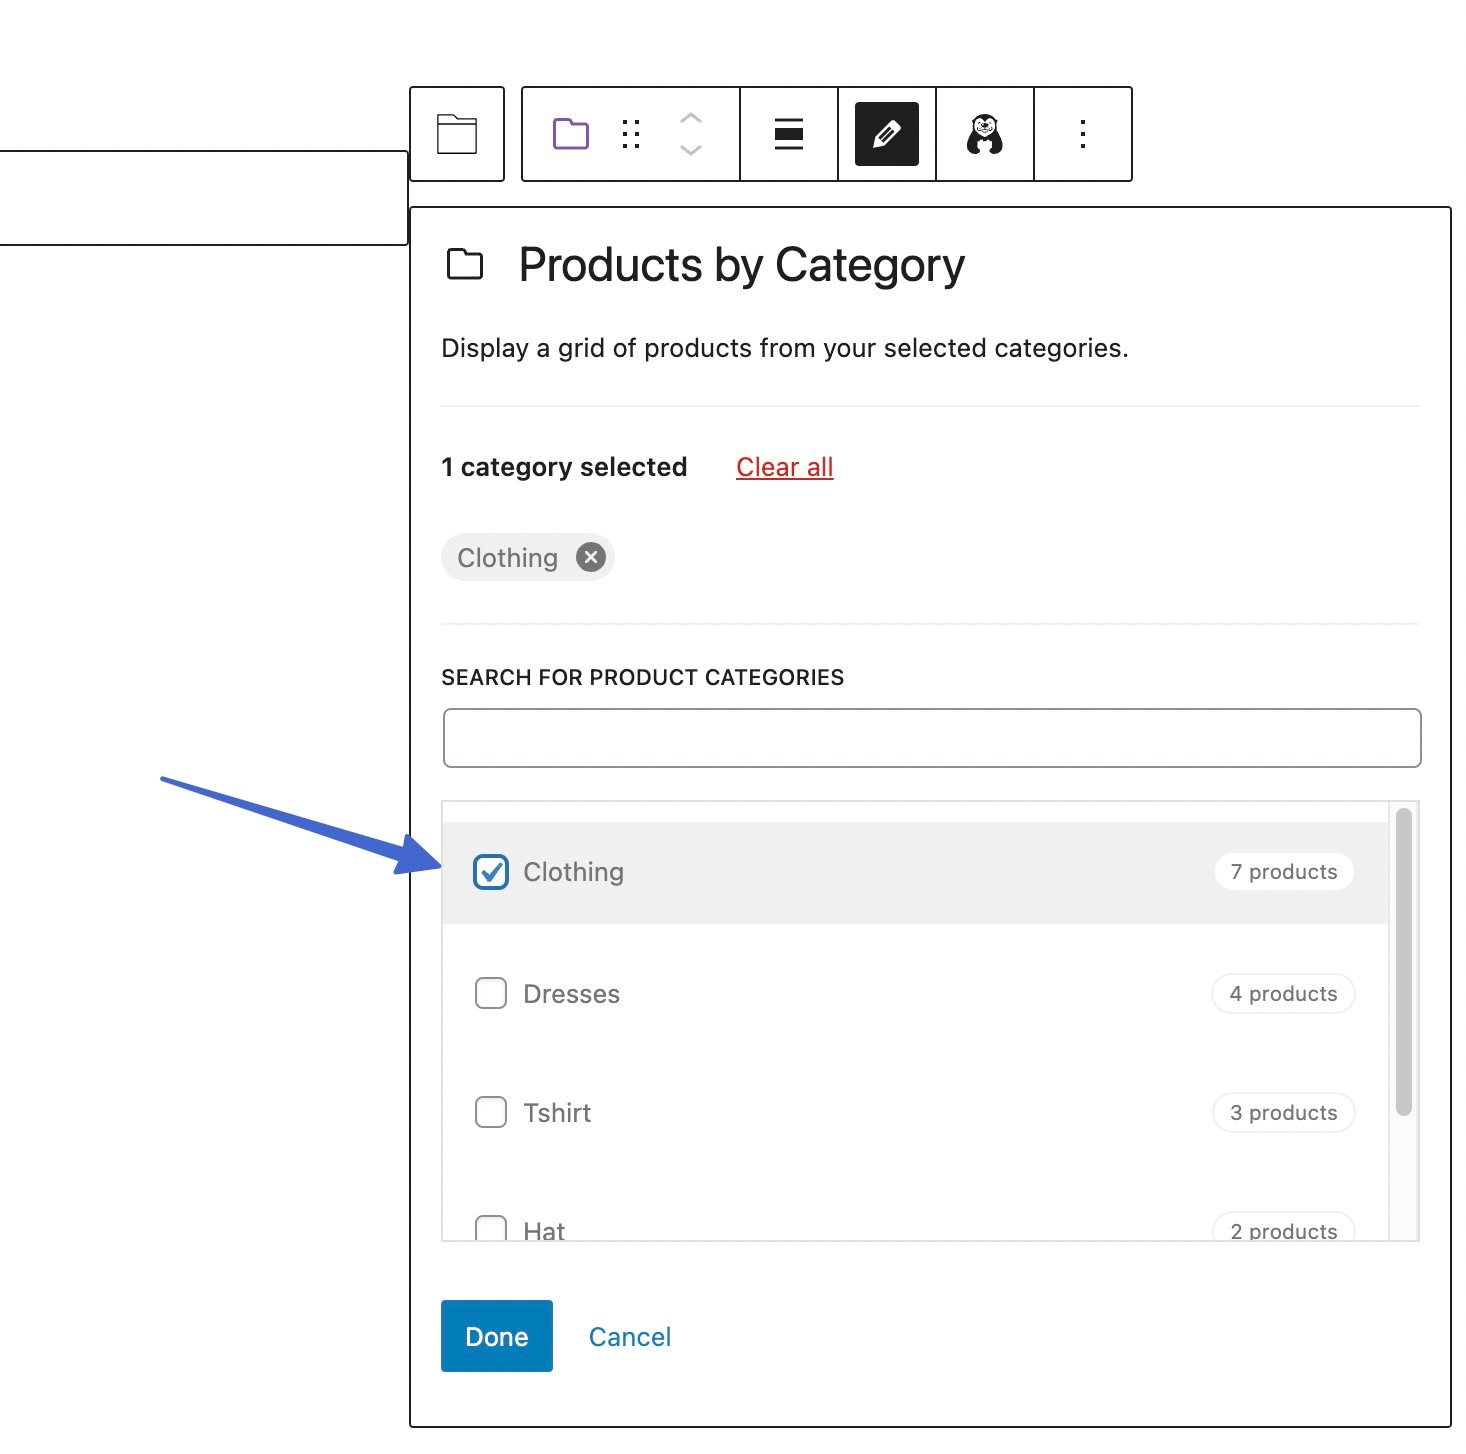 including the clothing category for WooCommerce featured products